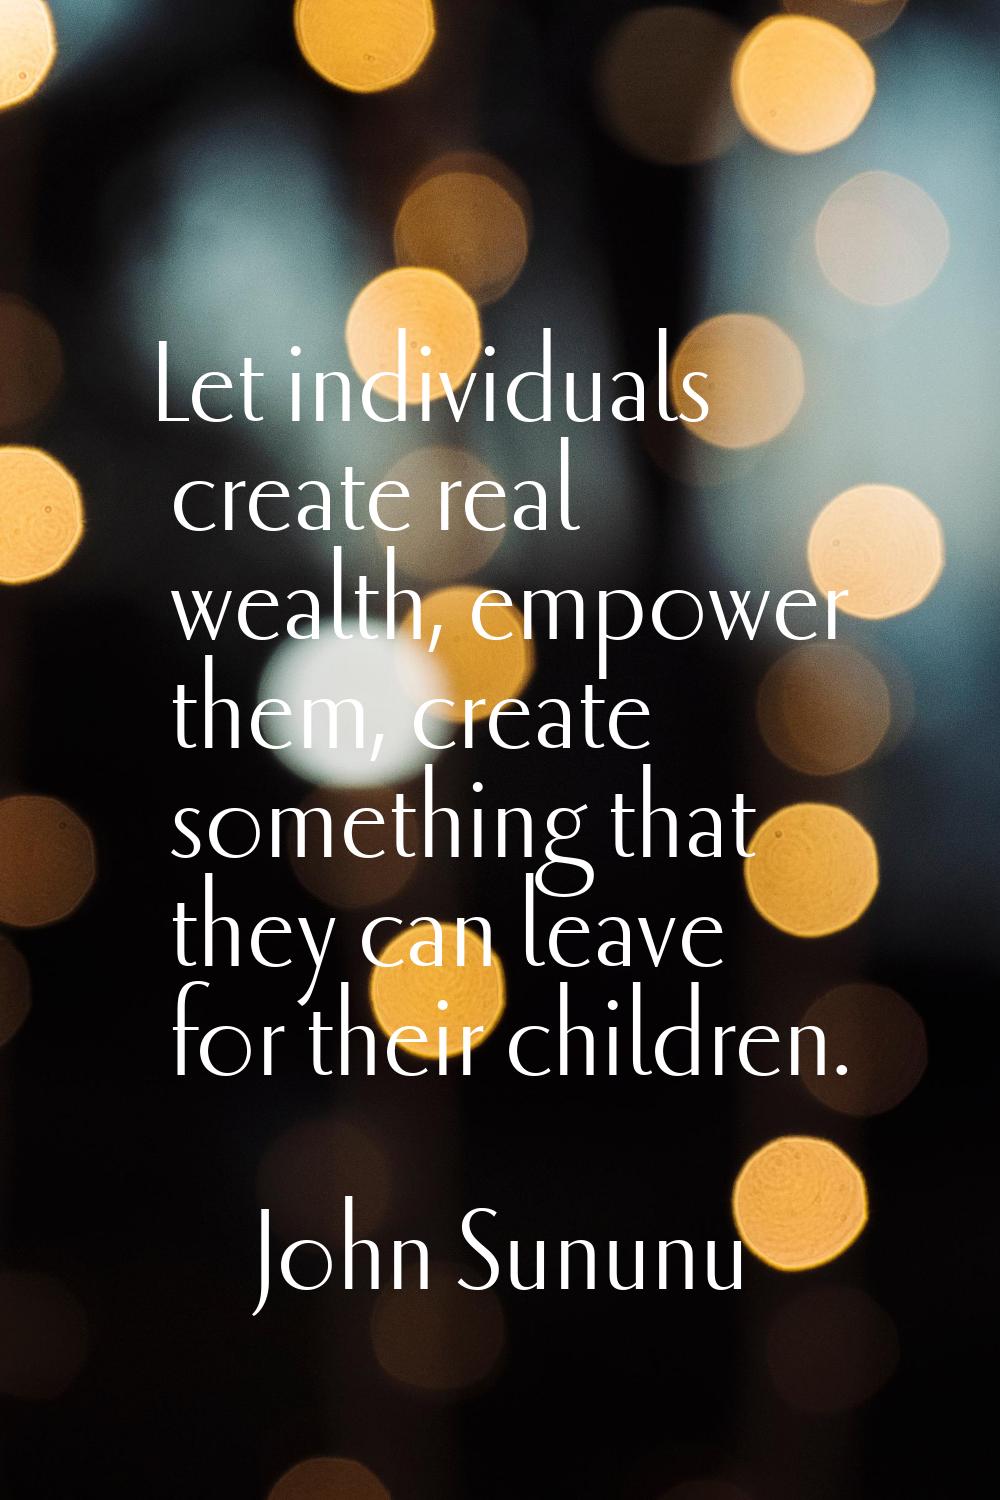 Let individuals create real wealth, empower them, create something that they can leave for their ch